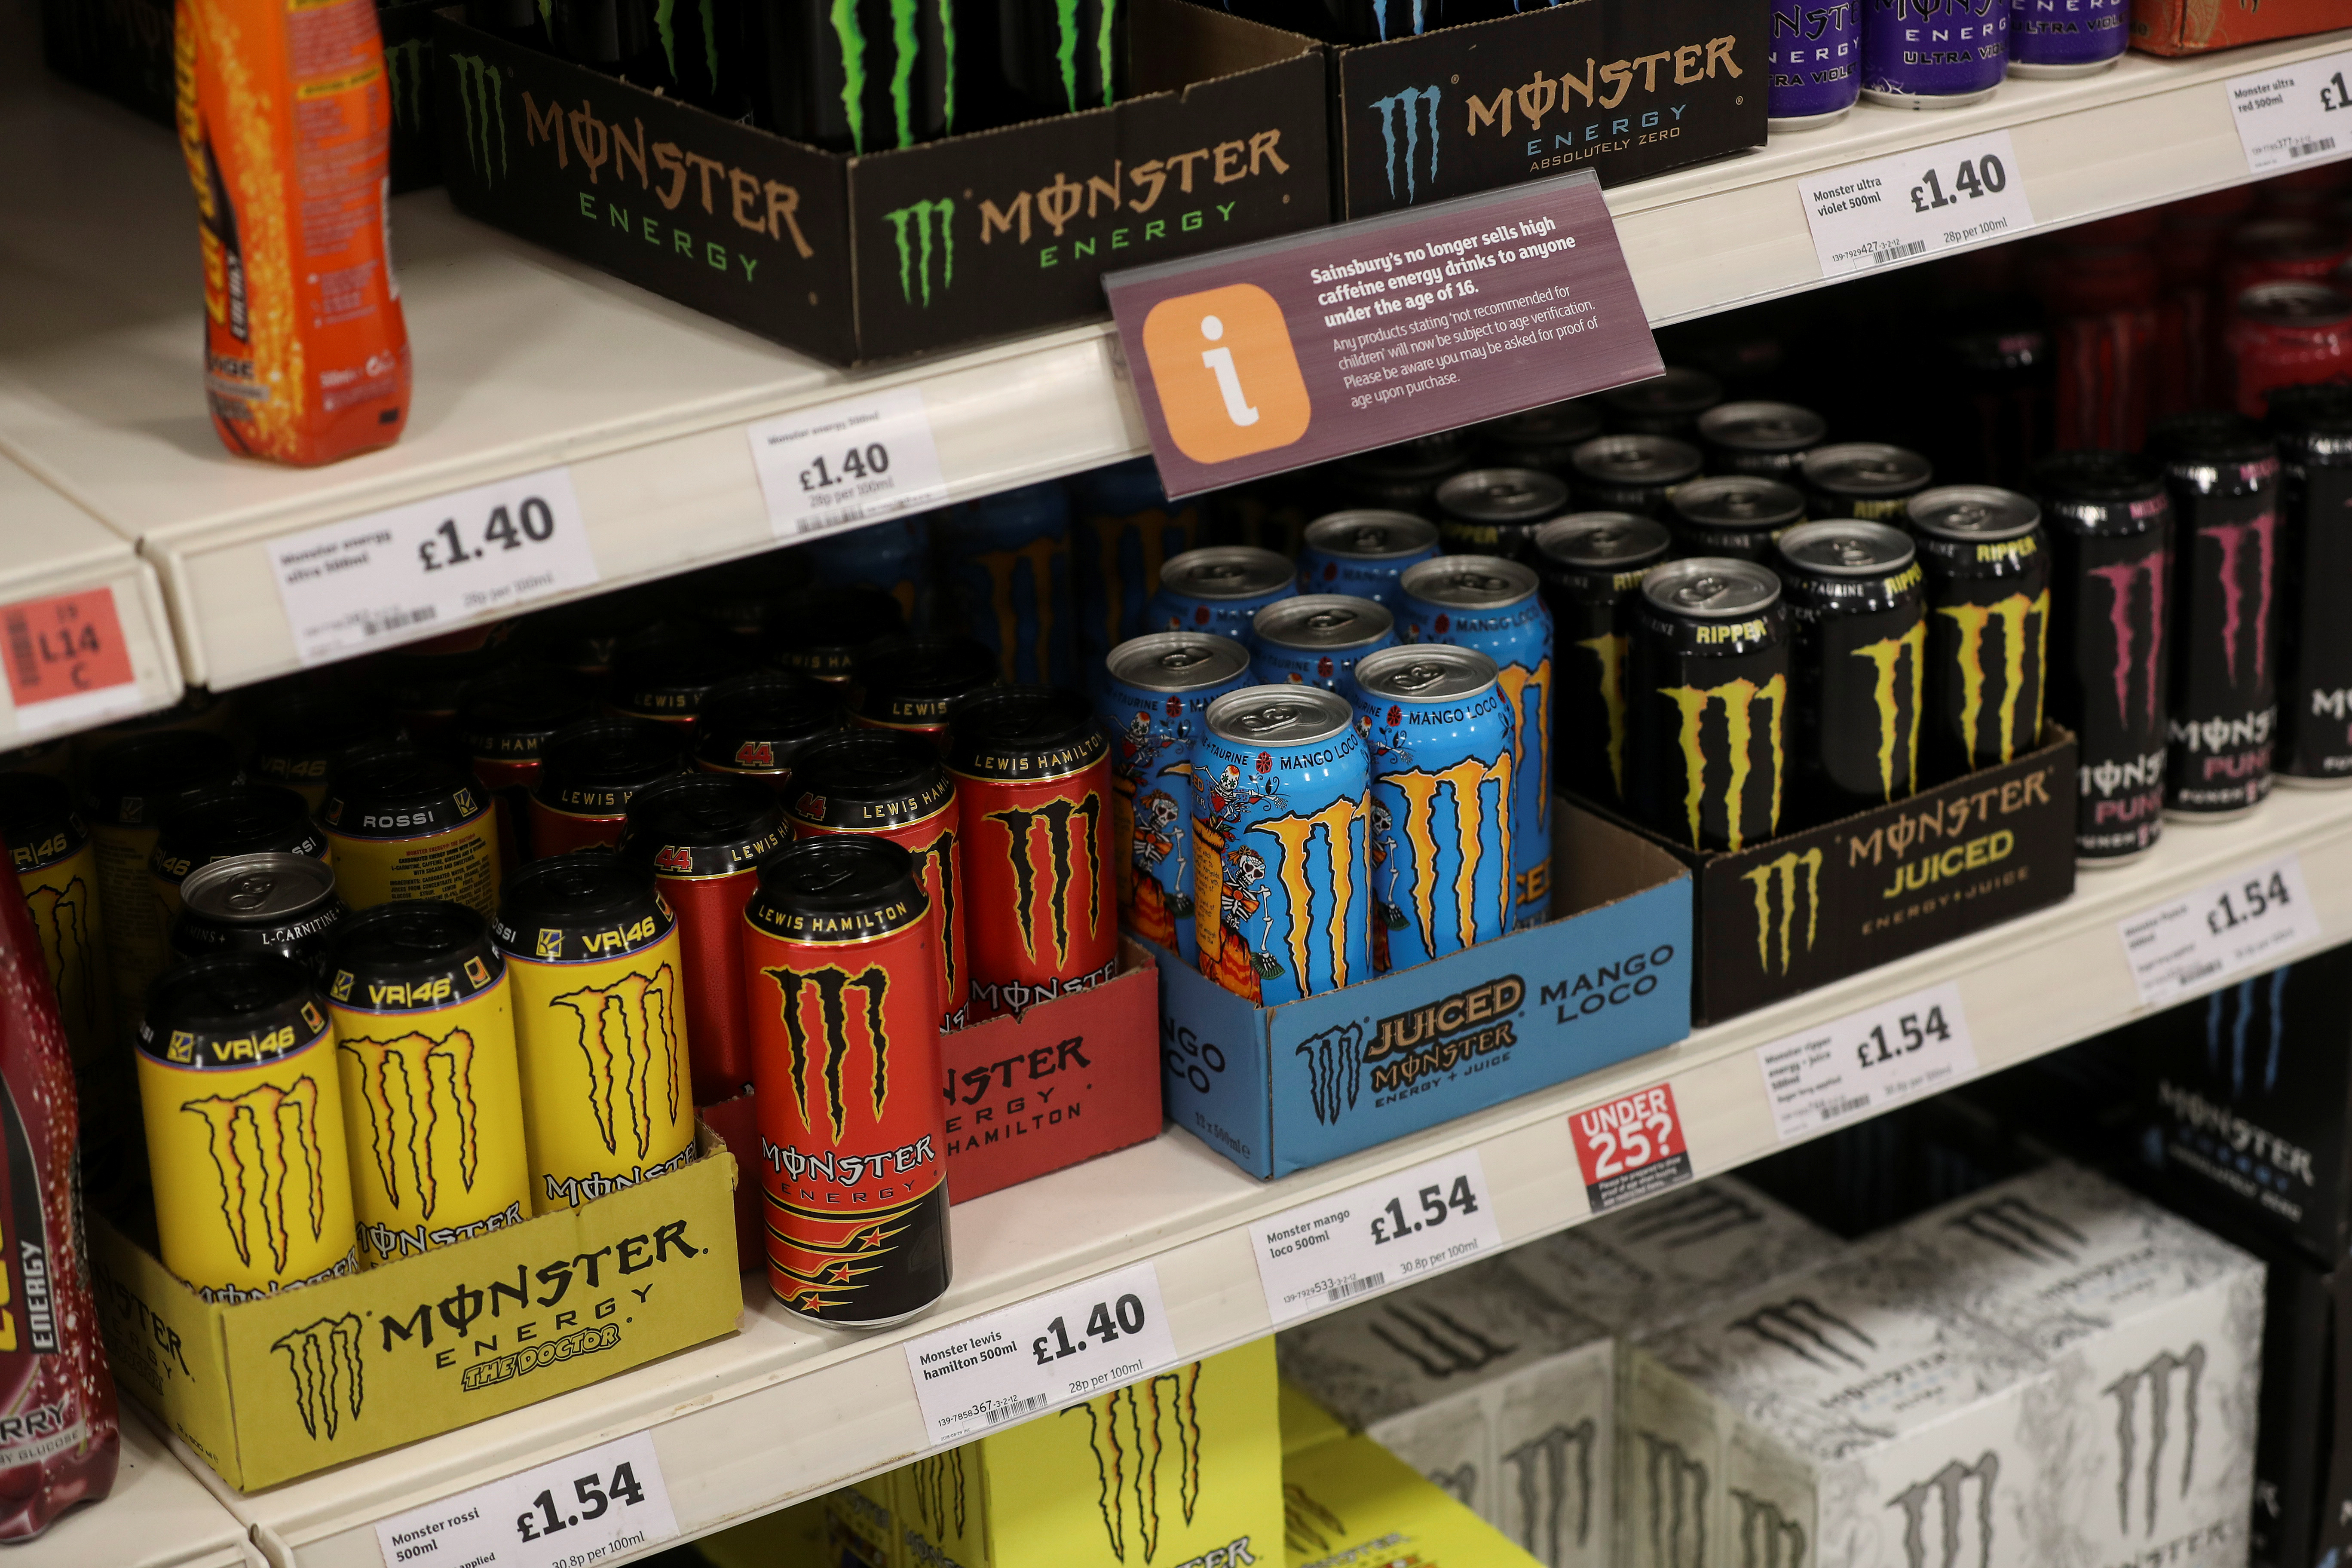 Monster energy drinks sit on display at a Sainsbury's store in London